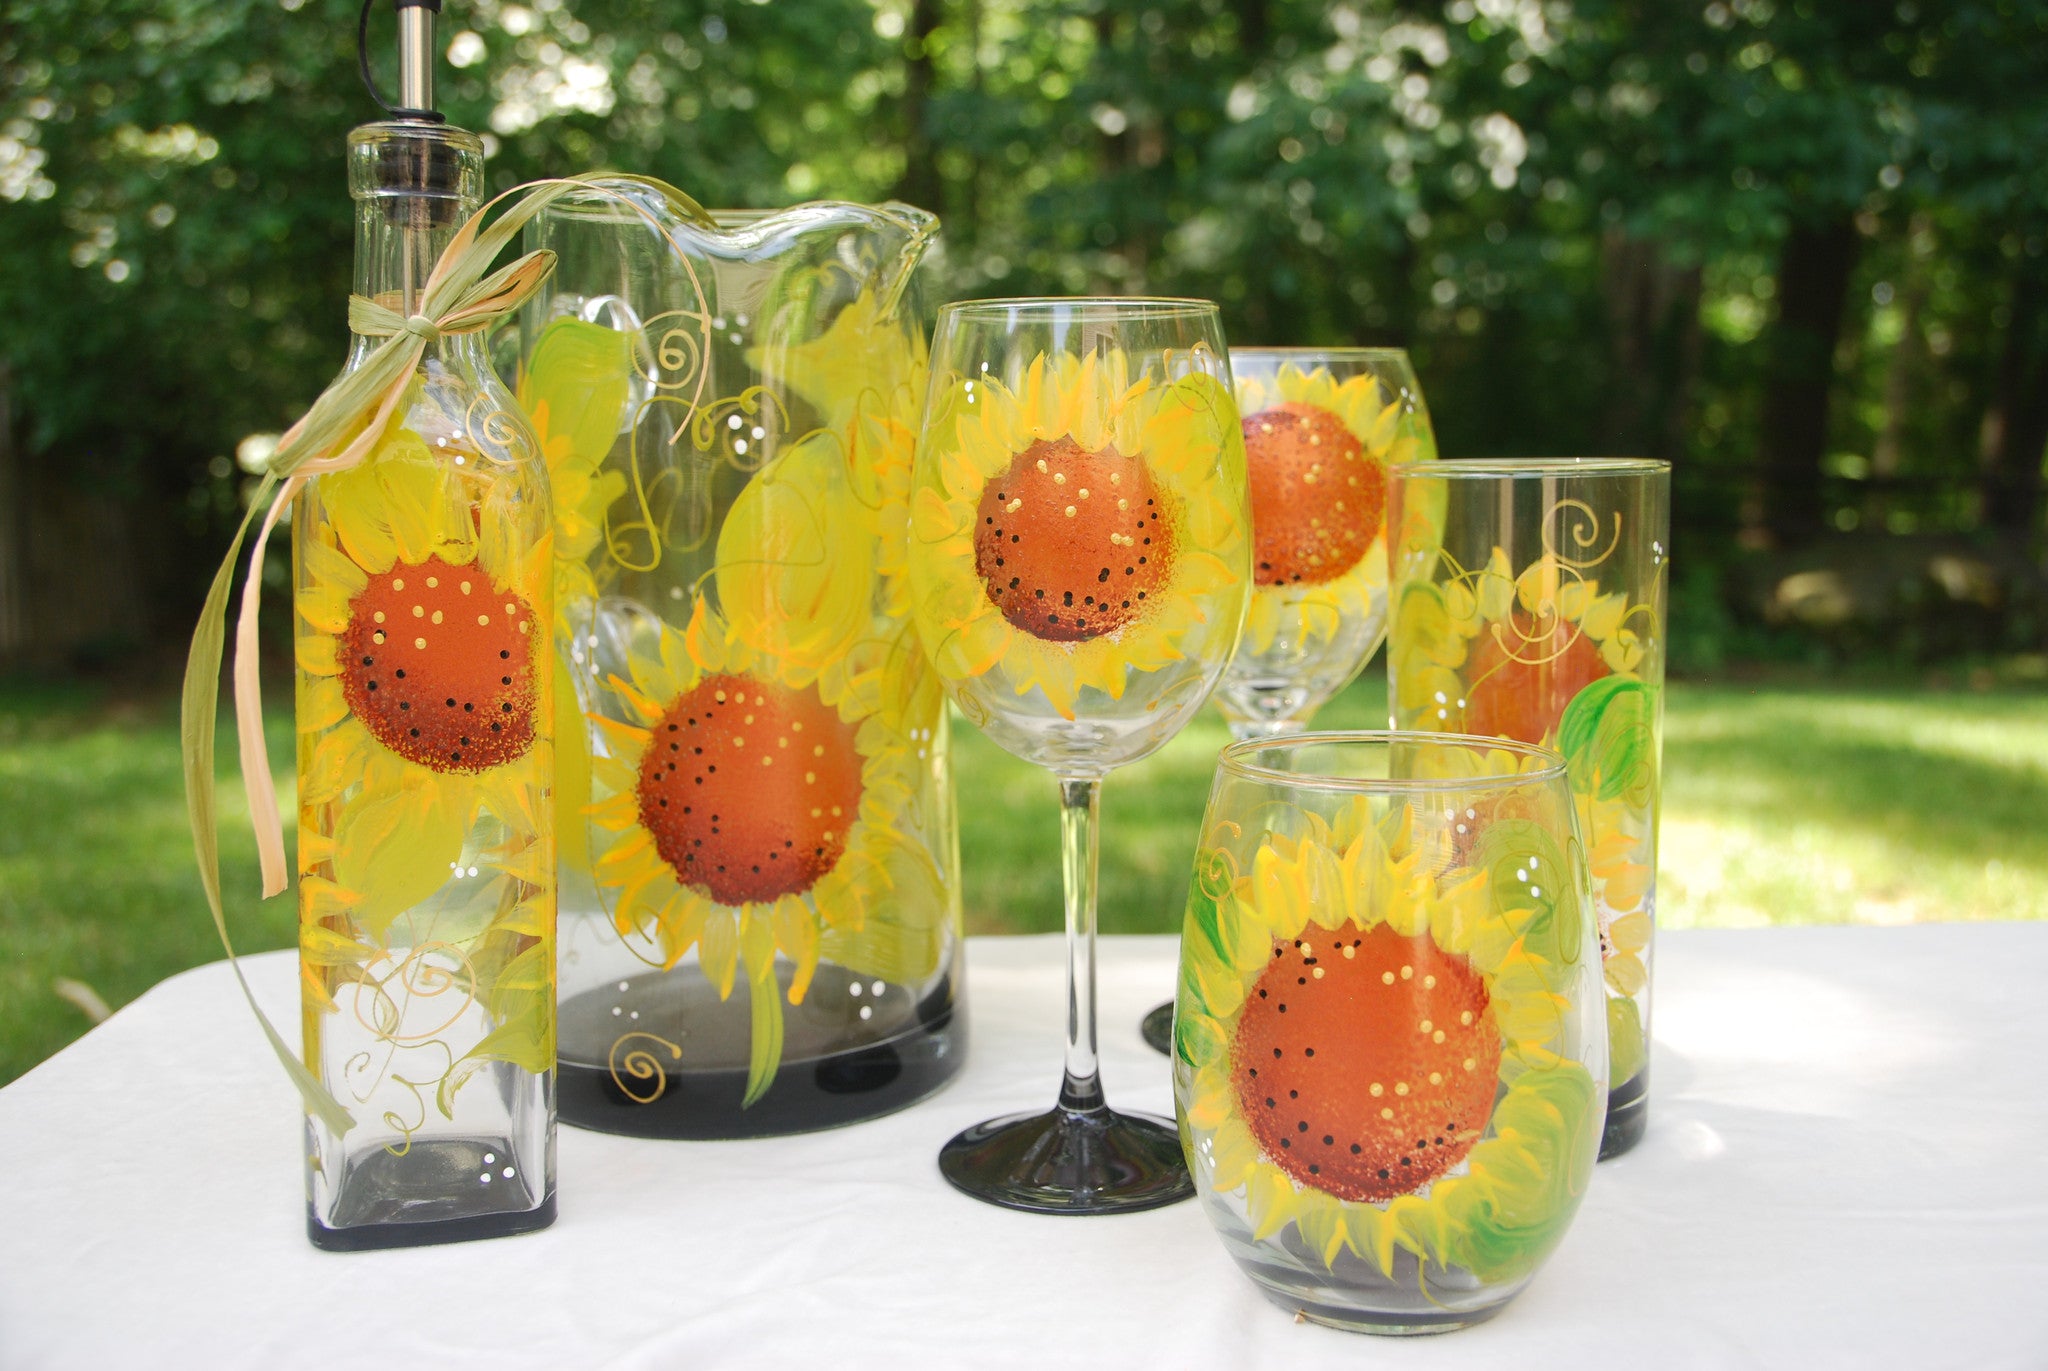 Hand Painted Wine Glasses - Julia's Floral - Handmade in the USA -  , LLC